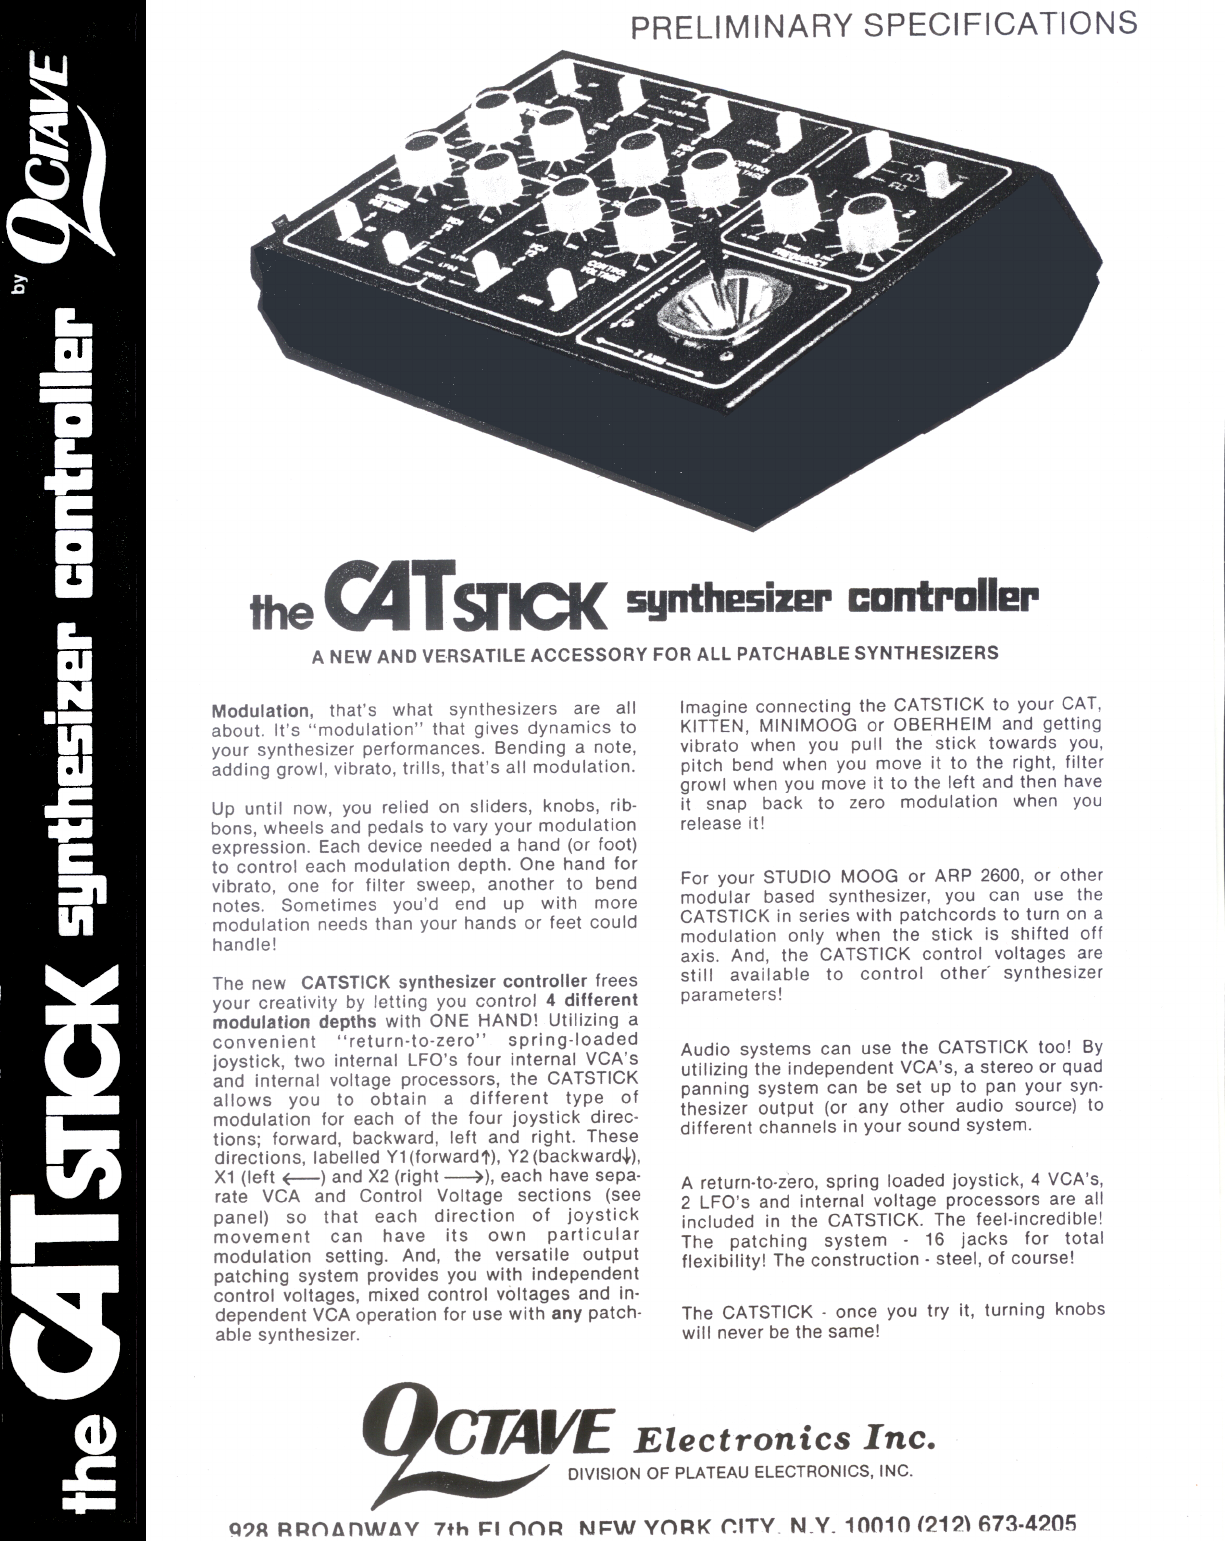 Page 1 of 6 - CatStick Cat Stick Info From Octave-Plateau